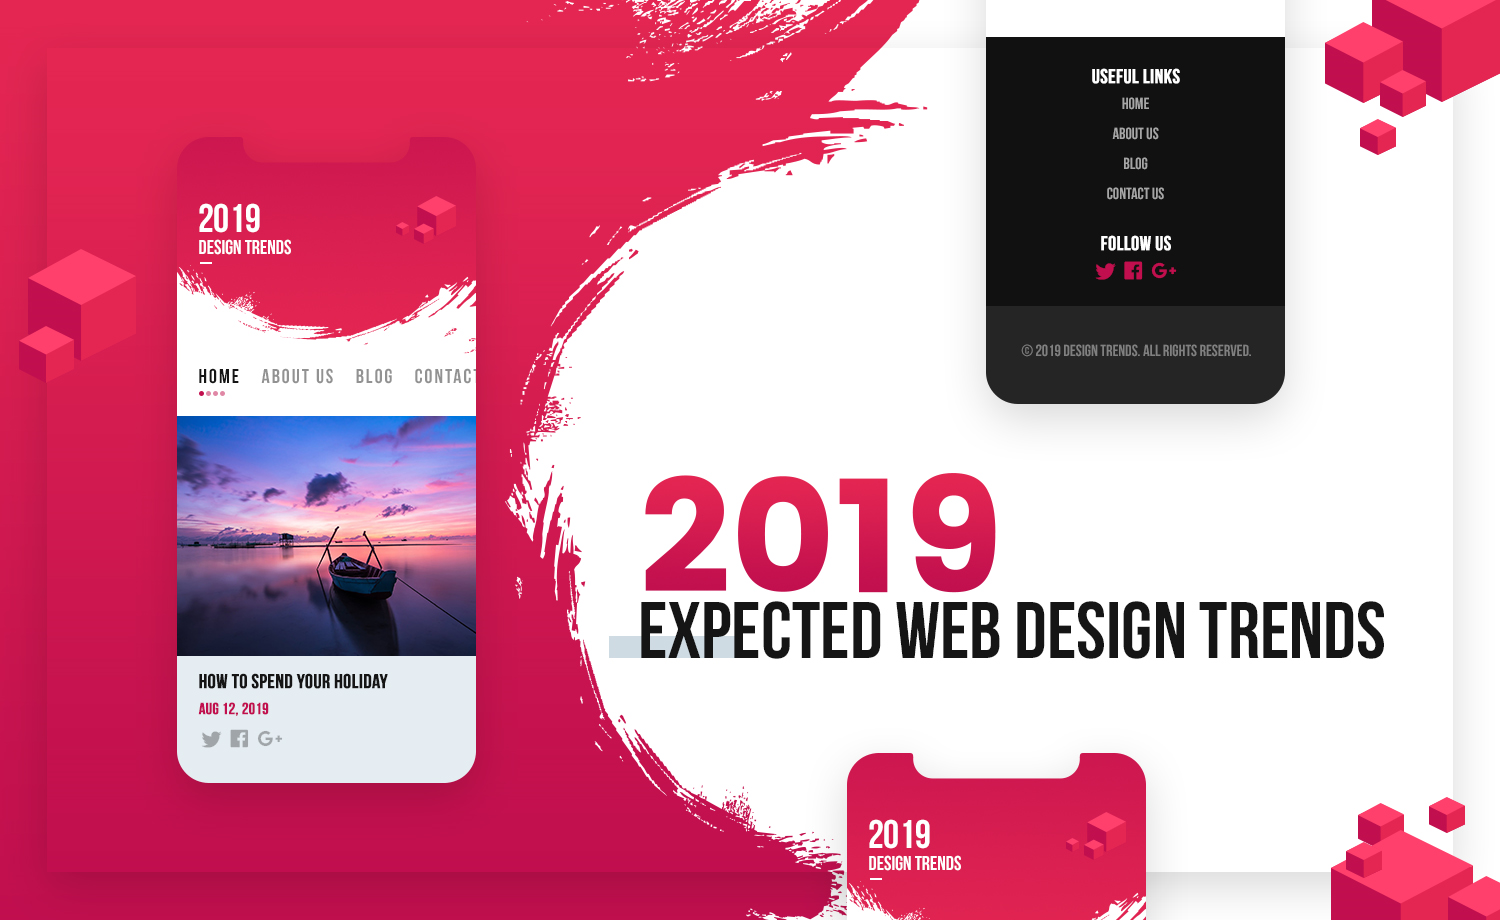 Expected Changes in Web Design for 2019